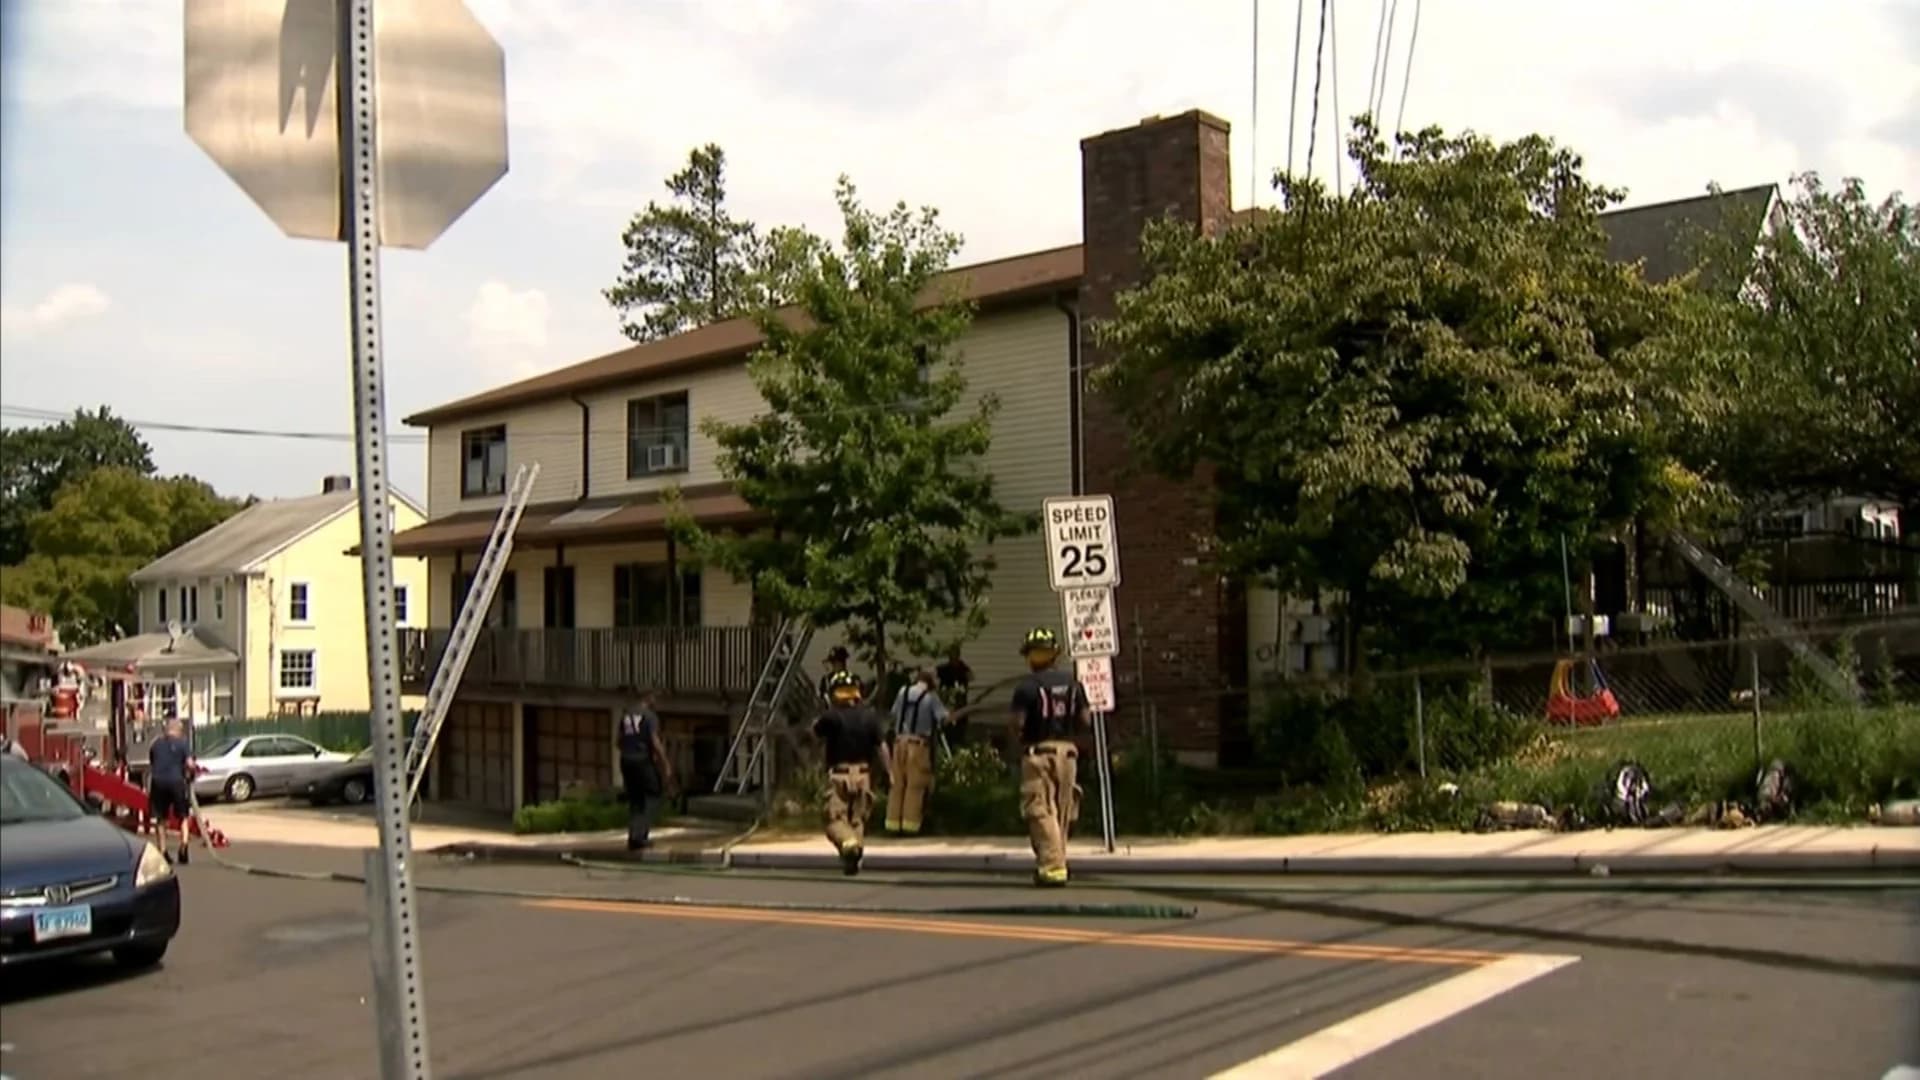 Officials: Smoke detectors helped saved 12 people in Stamford fire